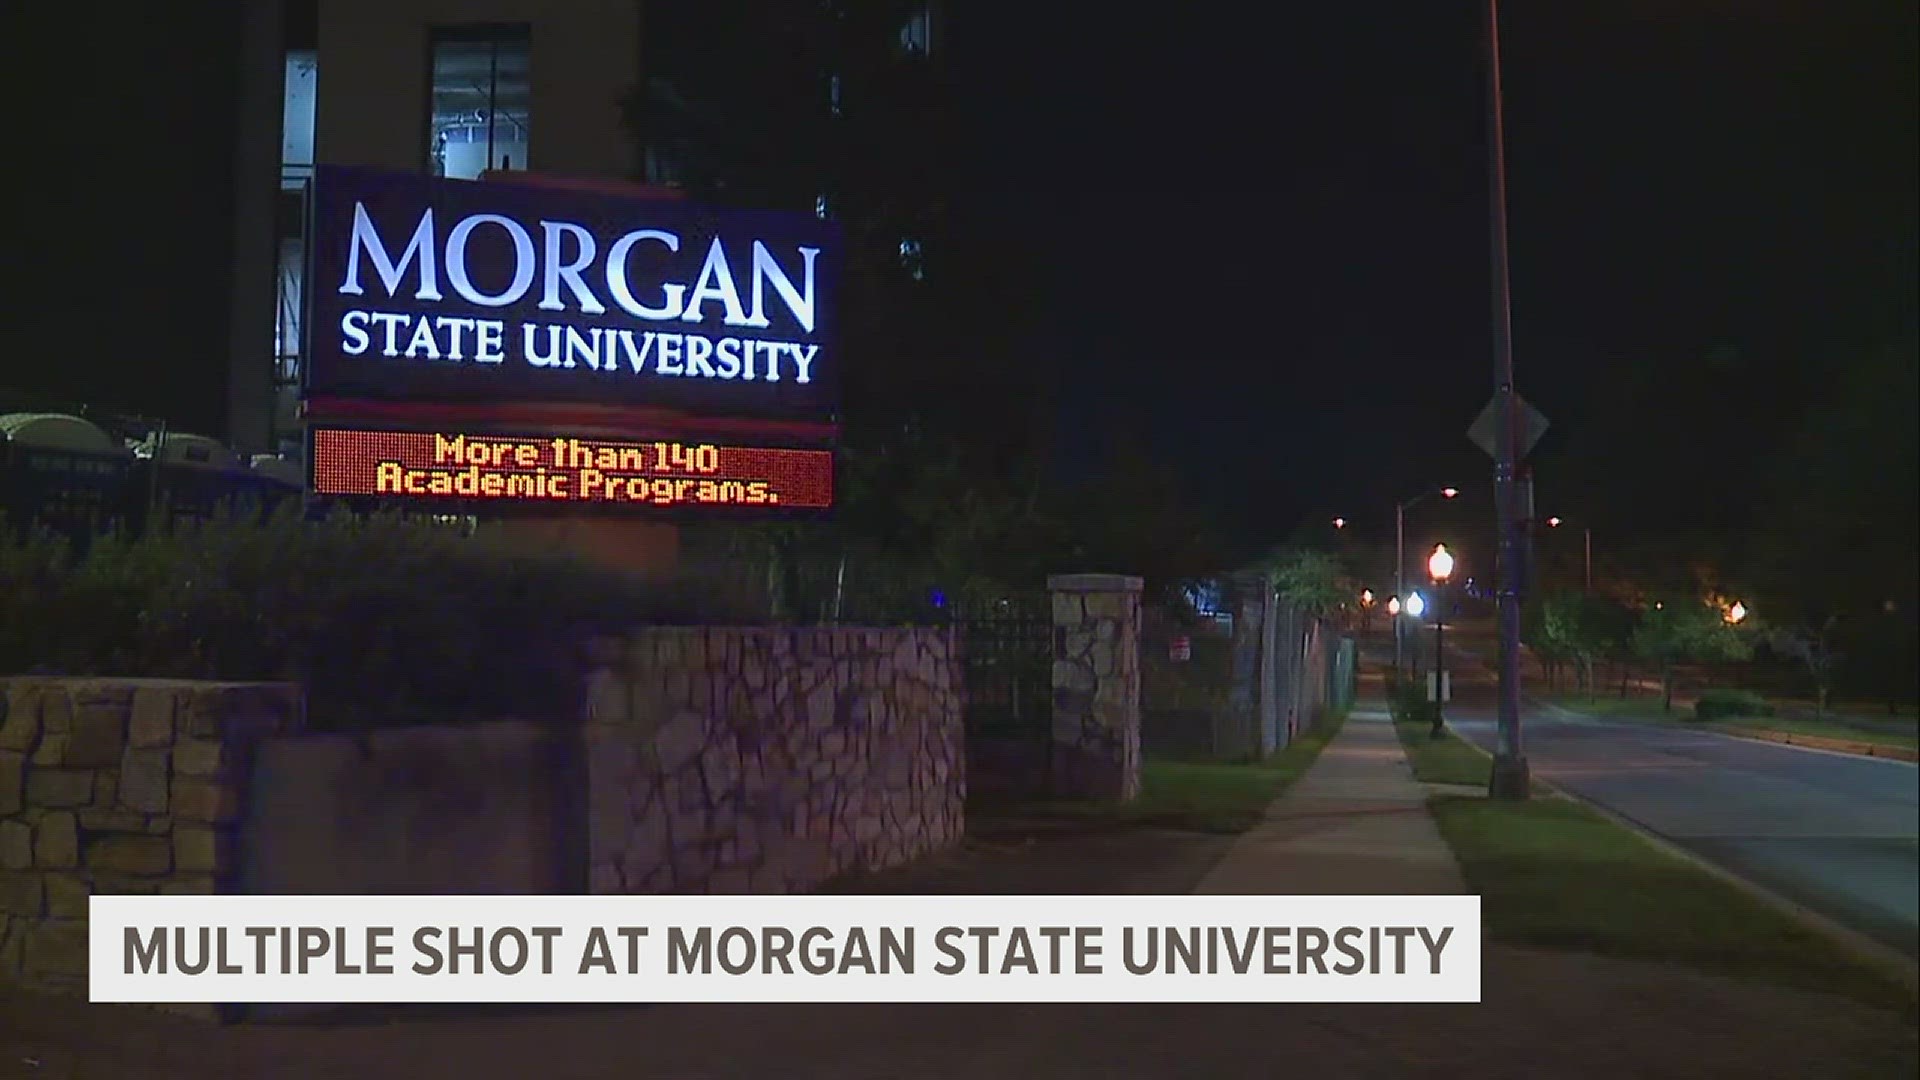 Students at Morgan State University are sheltering in place after five students were shot. A suspect hasn't been found, and the school has cancelled classes.